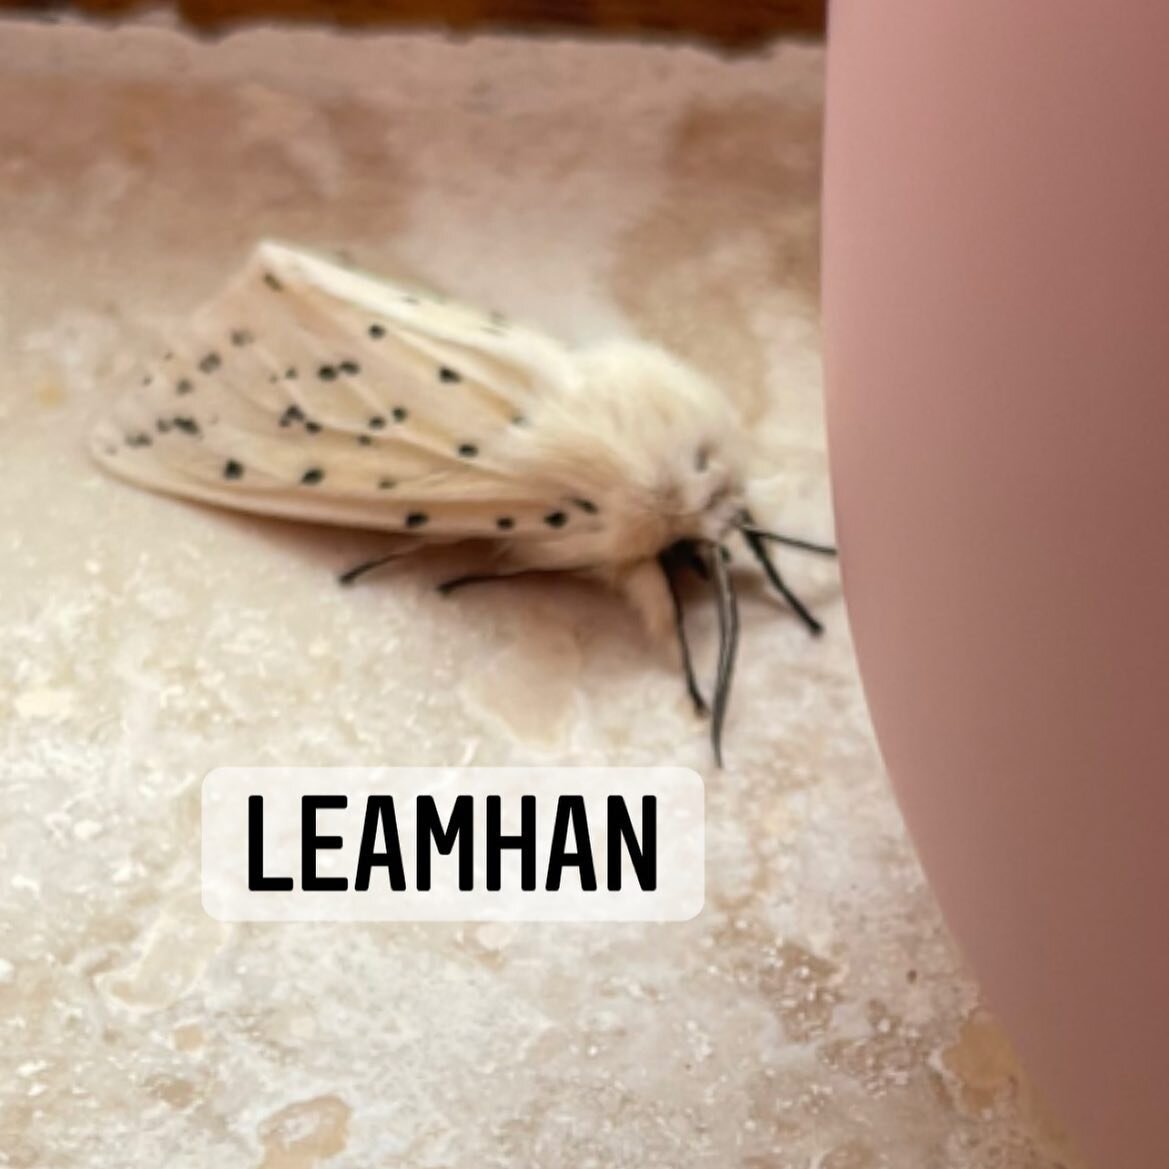 Focal an lae, word of the day leamhan = moth. Another word for it is f&eacute;ileac&aacute;n o&iacute;che or night butterfly.